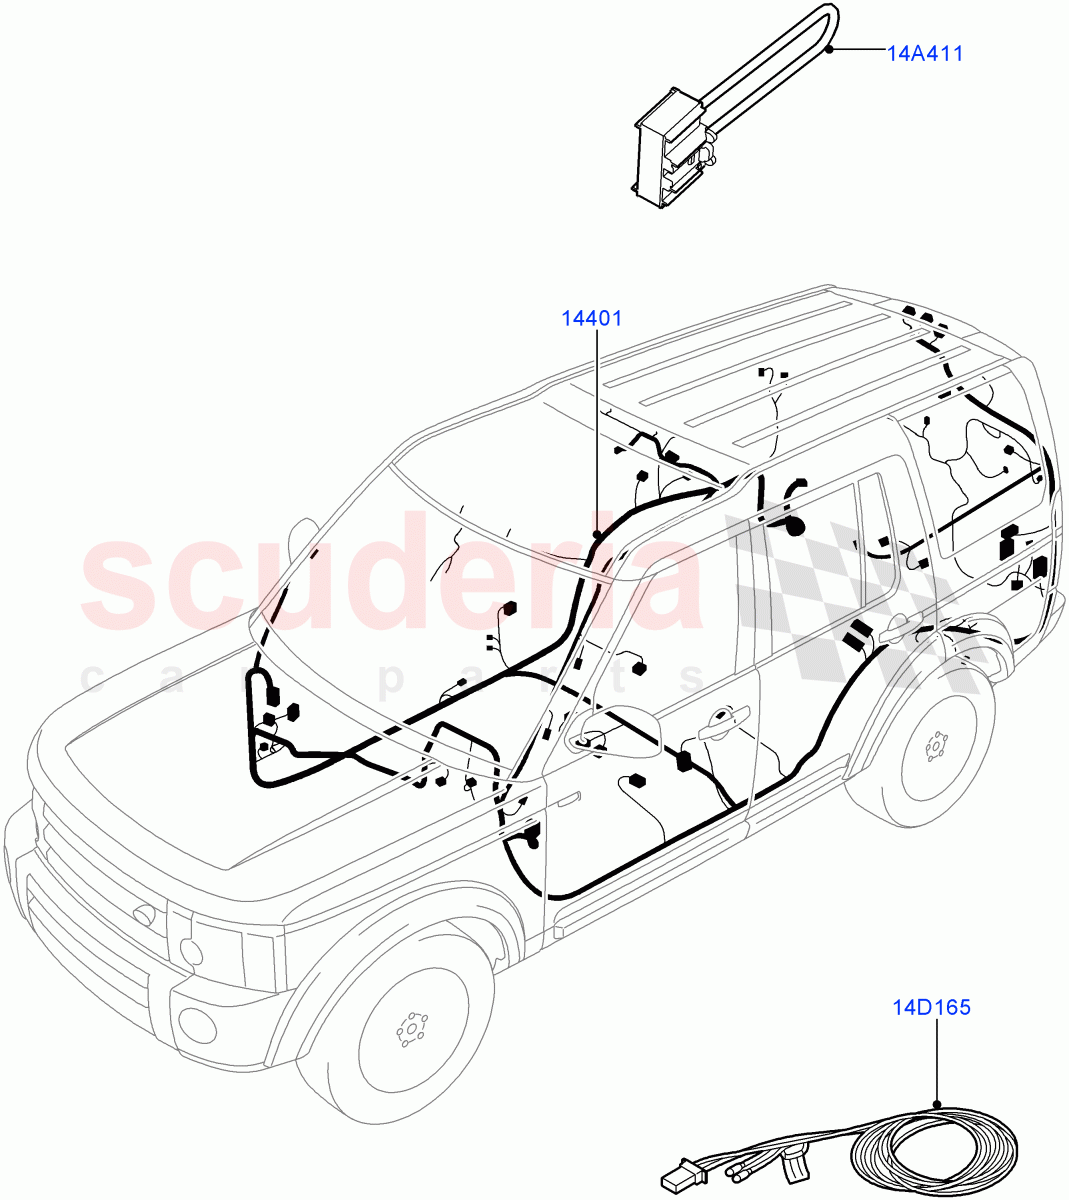 Electrical Wiring - Engine And Dash(Main Harness)((V)FROMAA000001,(V)TOAA999999) of Land Rover Land Rover Discovery 4 (2010-2016) [3.0 DOHC GDI SC V6 Petrol]